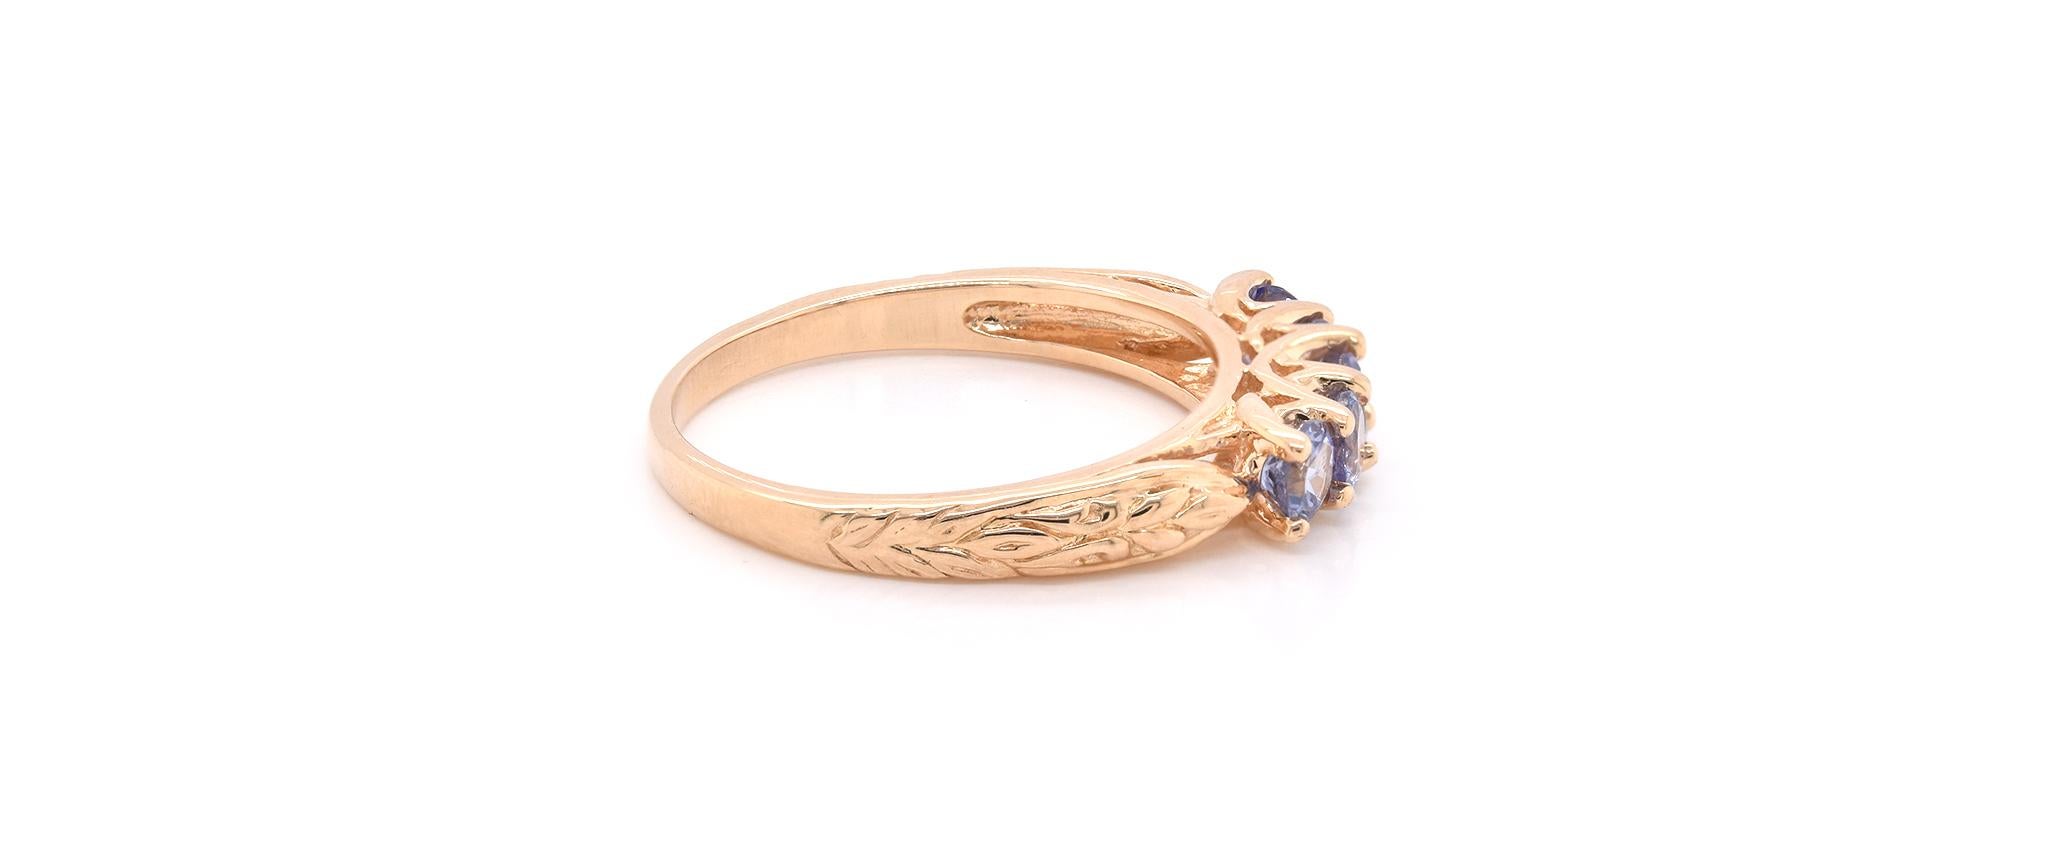 Material: 14k yellow gold
Gemstone: 5 round cut tanzanite’s
Dimensions: ring measures 4.40mm in width
Ring Size: 8 ¾ (please allow two extra shipping days for sizing requests) 
Weight: 4.0 grams